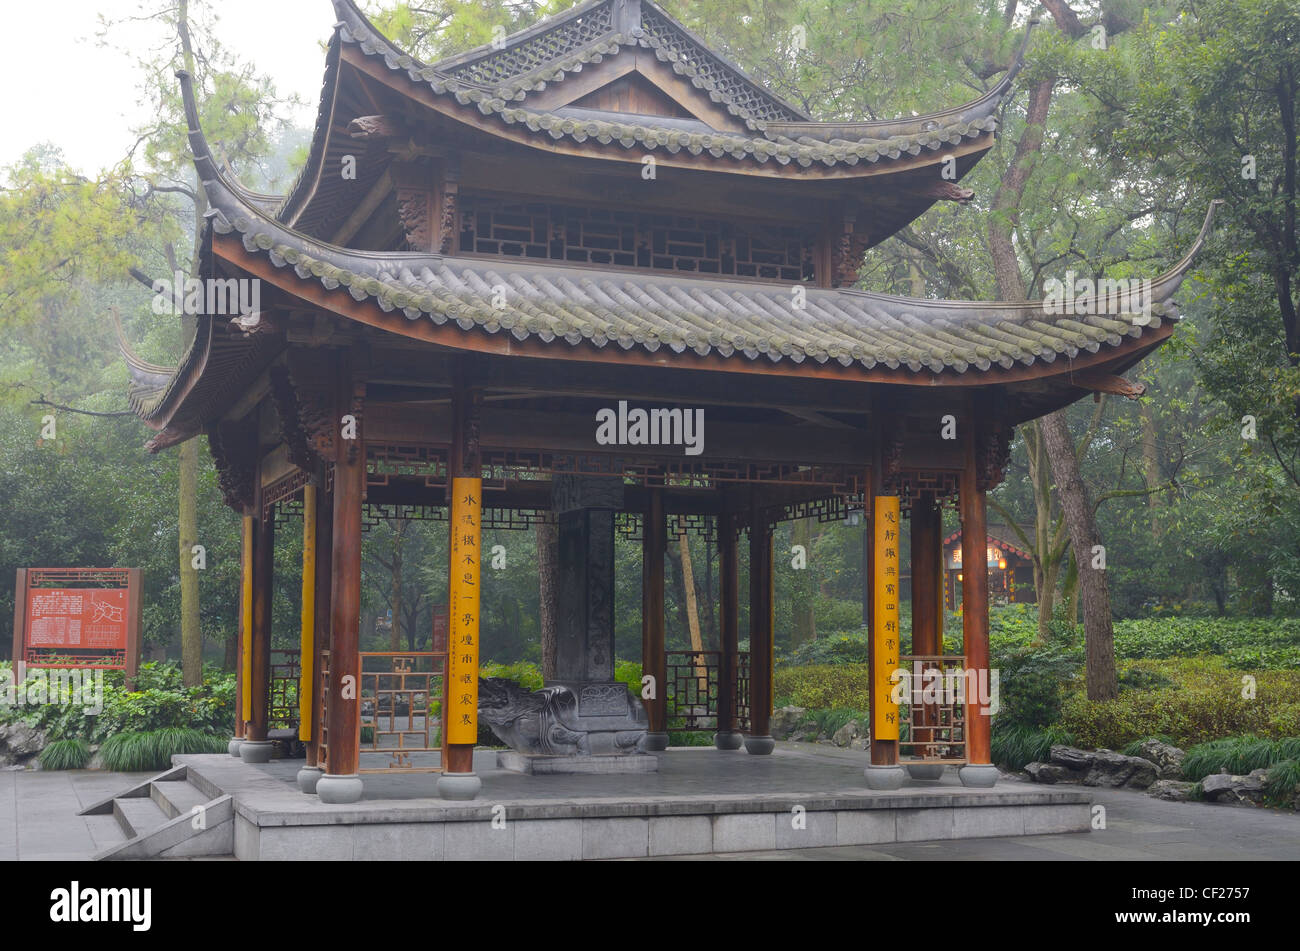 Pagoda with stone turtle under column in Lingyin temple park Hangzhou Peoples Republic of China Stock Photo